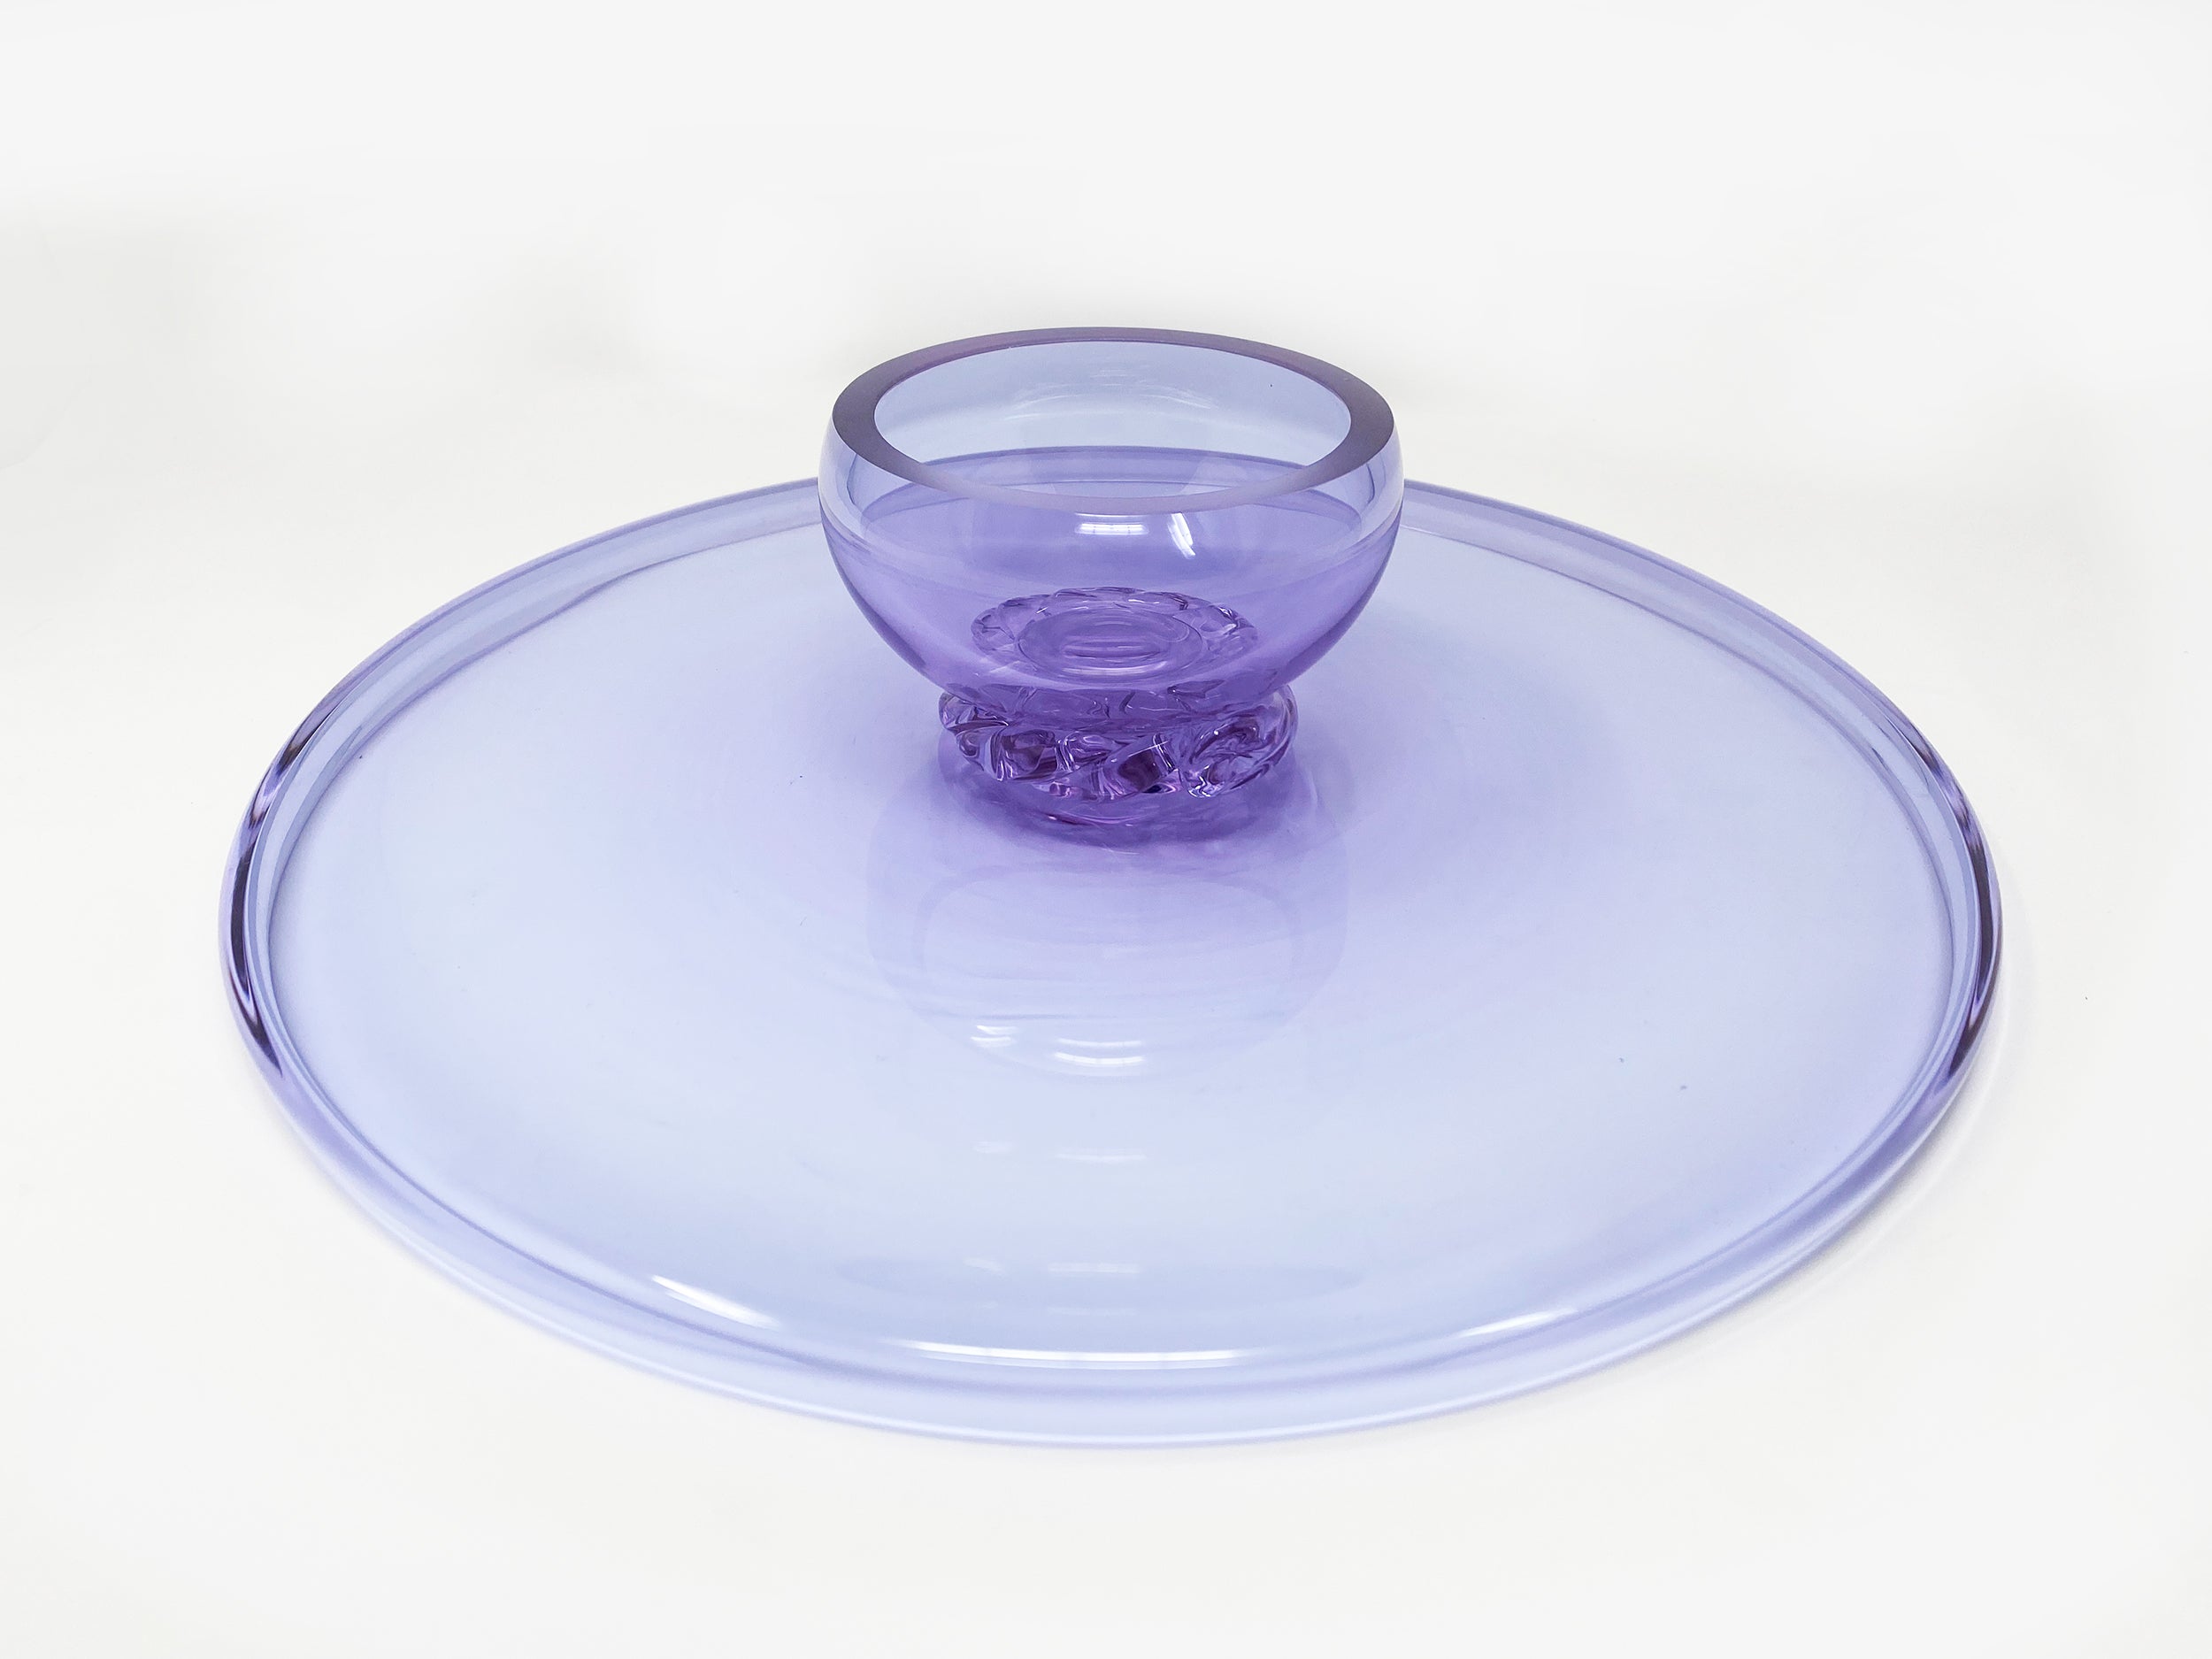 2 in 1 Cake Stand & Party Platter in Lilac